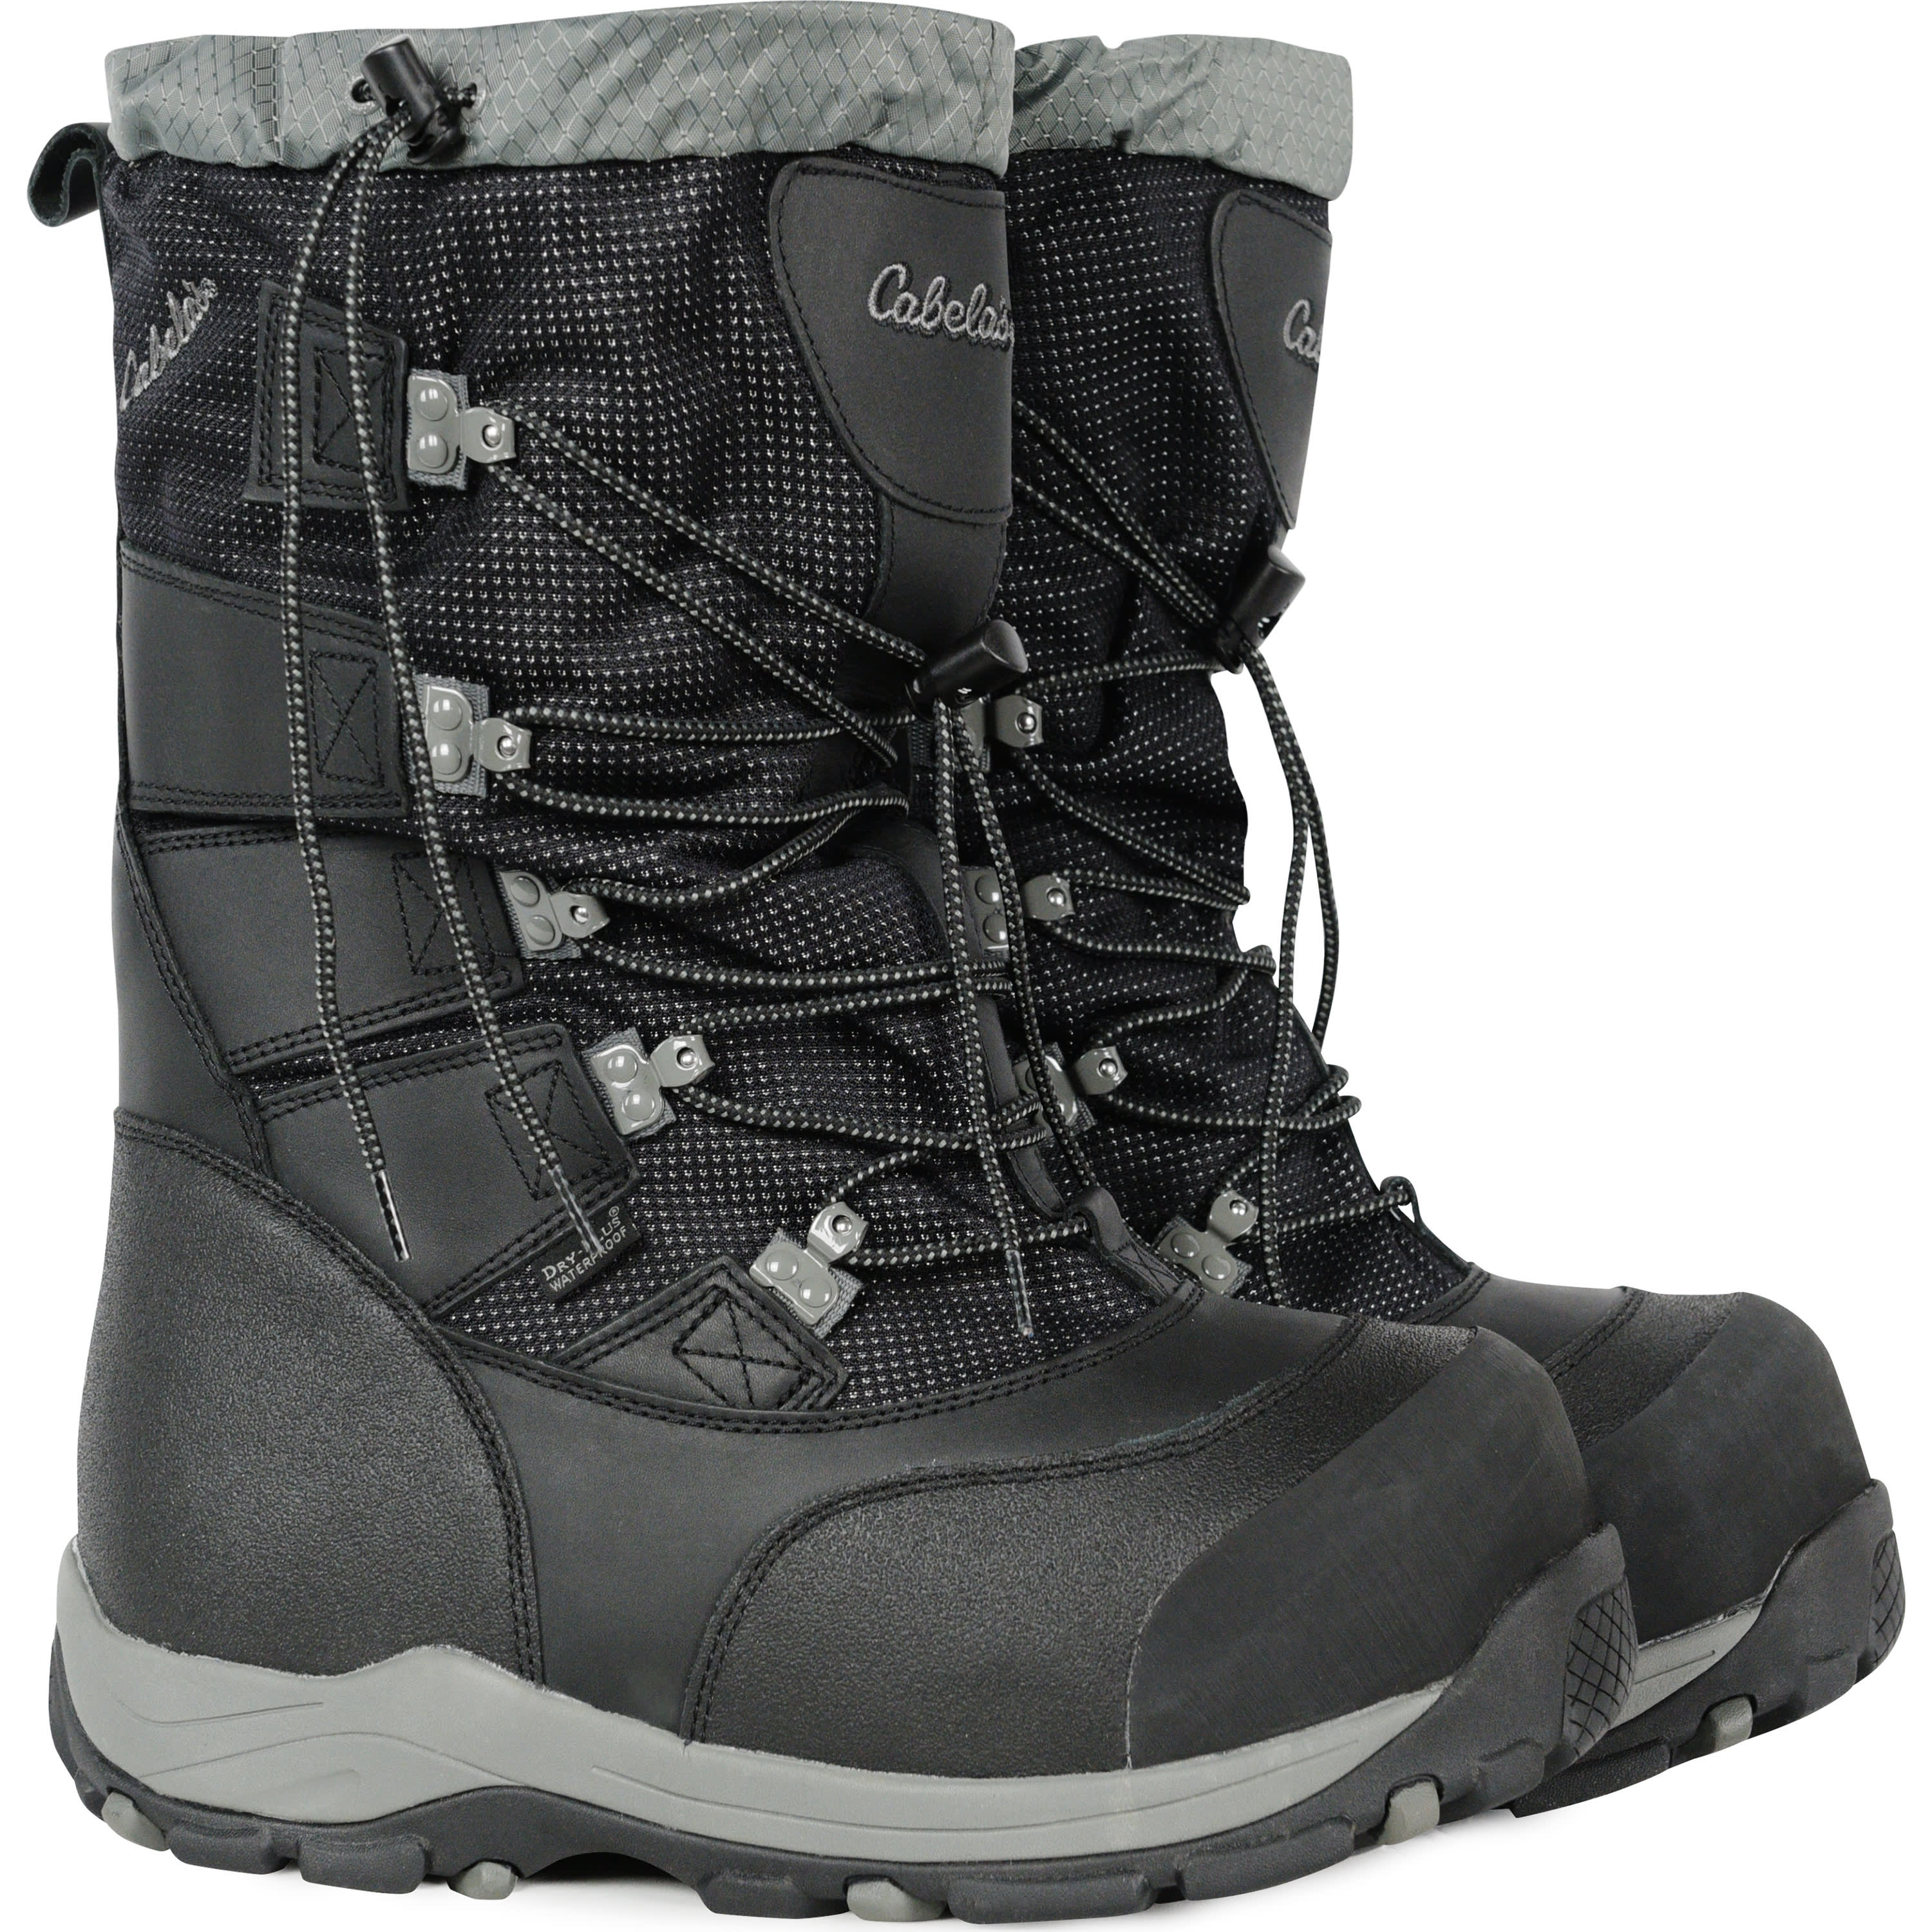 Cabela's Snow Boots Clearance | www.medialit.org